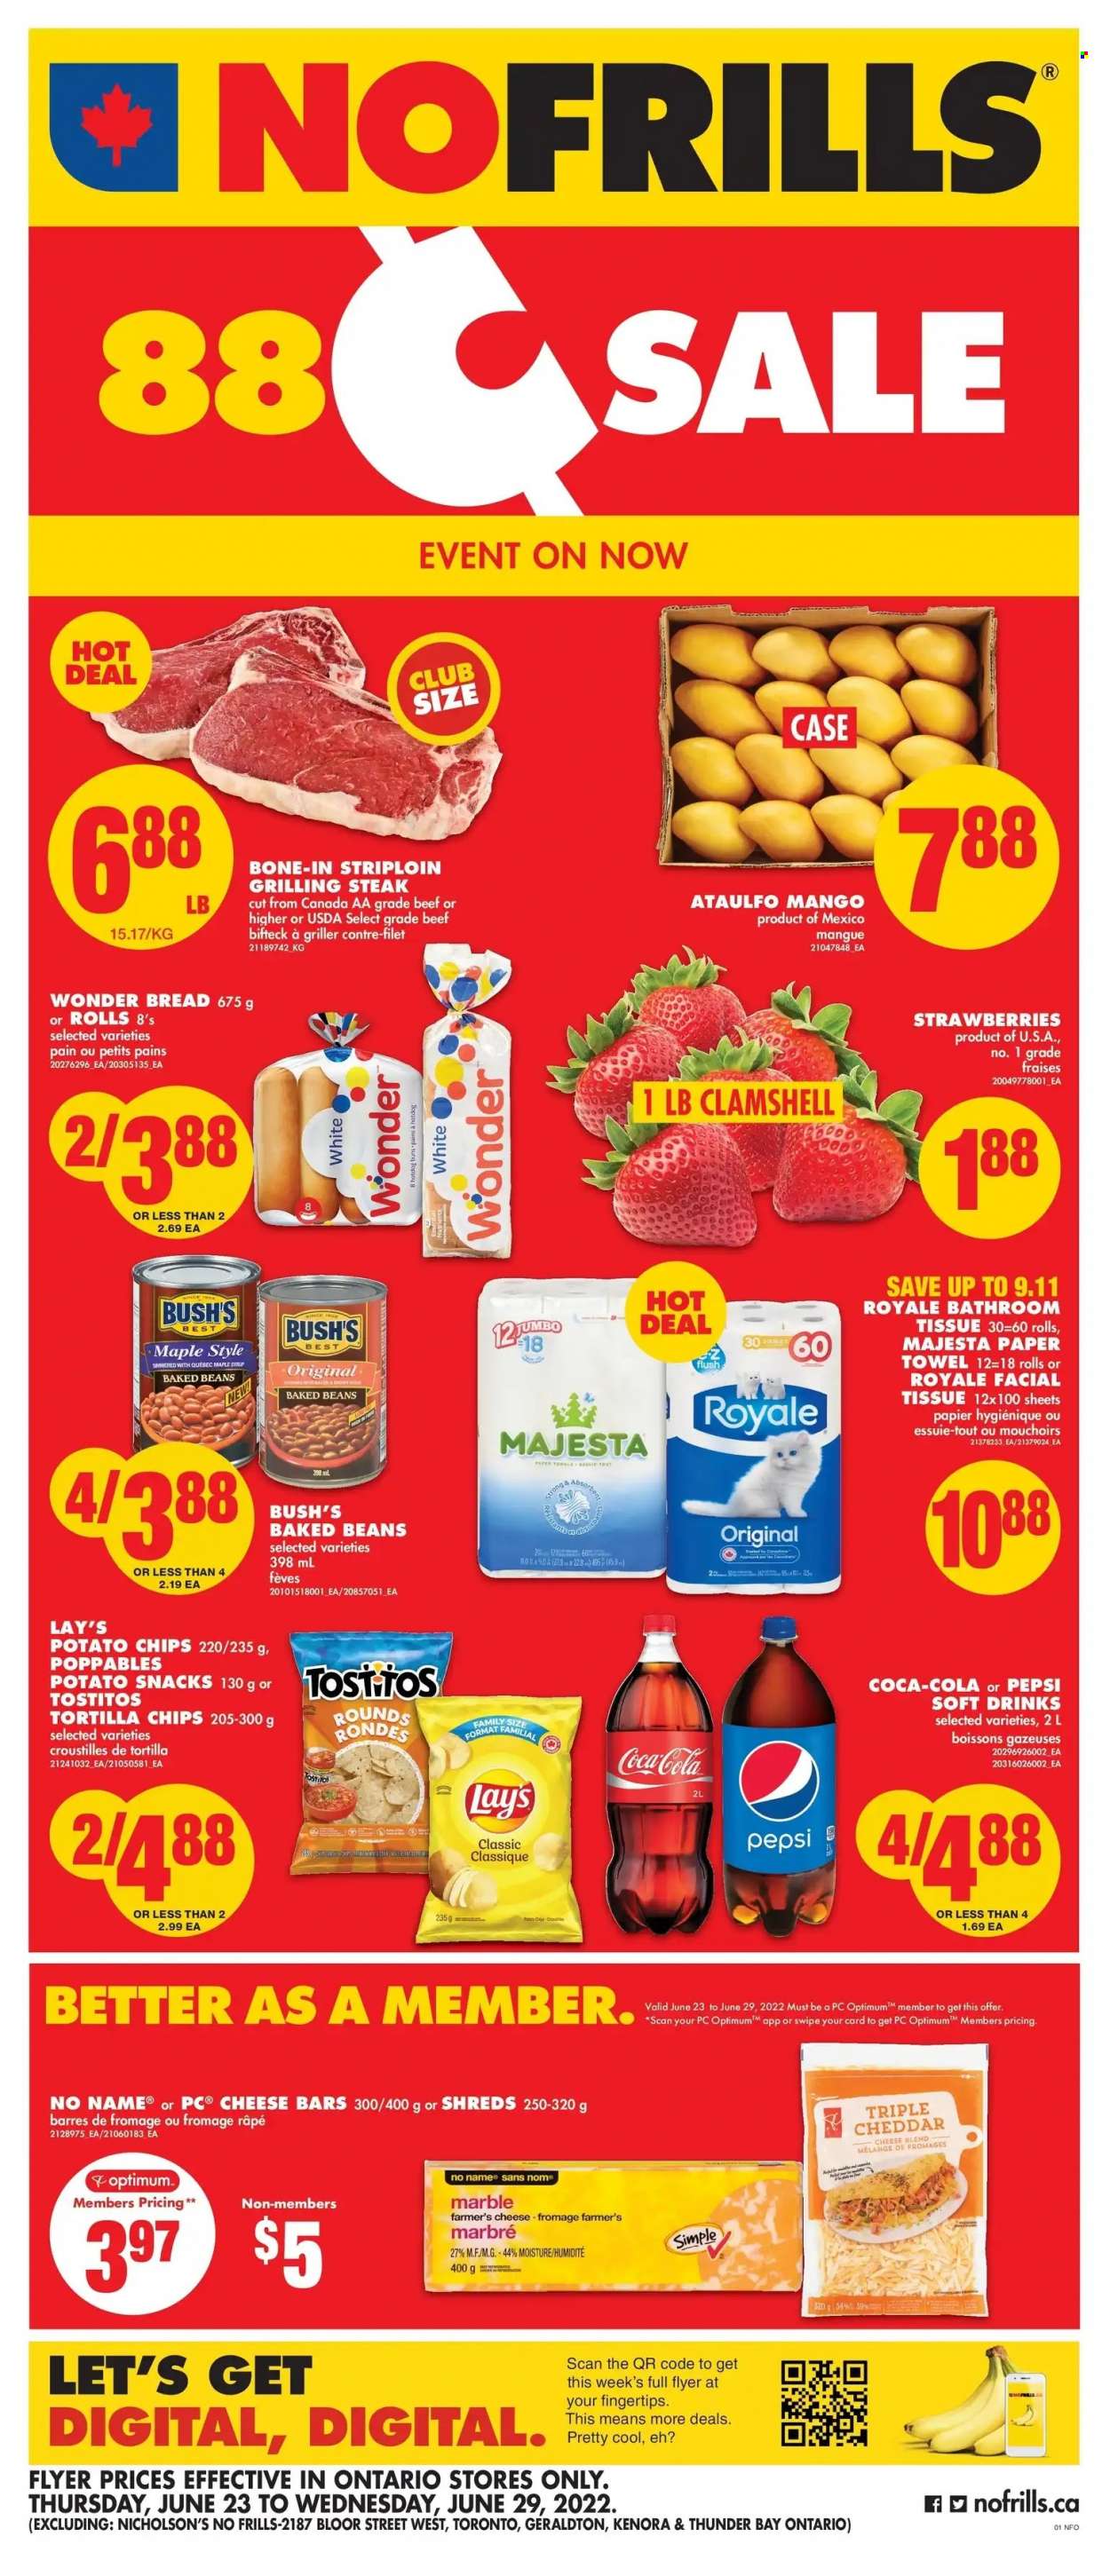 thumbnail - No Frills Flyer - June 23, 2022 - June 29, 2022 - Sales products - bread, hot dog rolls, buns, beans, mango, No Name, cheese, snack, tortilla chips, potato chips, chips, Lay’s, Tostitos, baked beans, maple syrup, syrup, Coca-Cola, Pepsi, soft drink, tissues, kitchen towels, paper towels, Optimum, steak. Page 1.